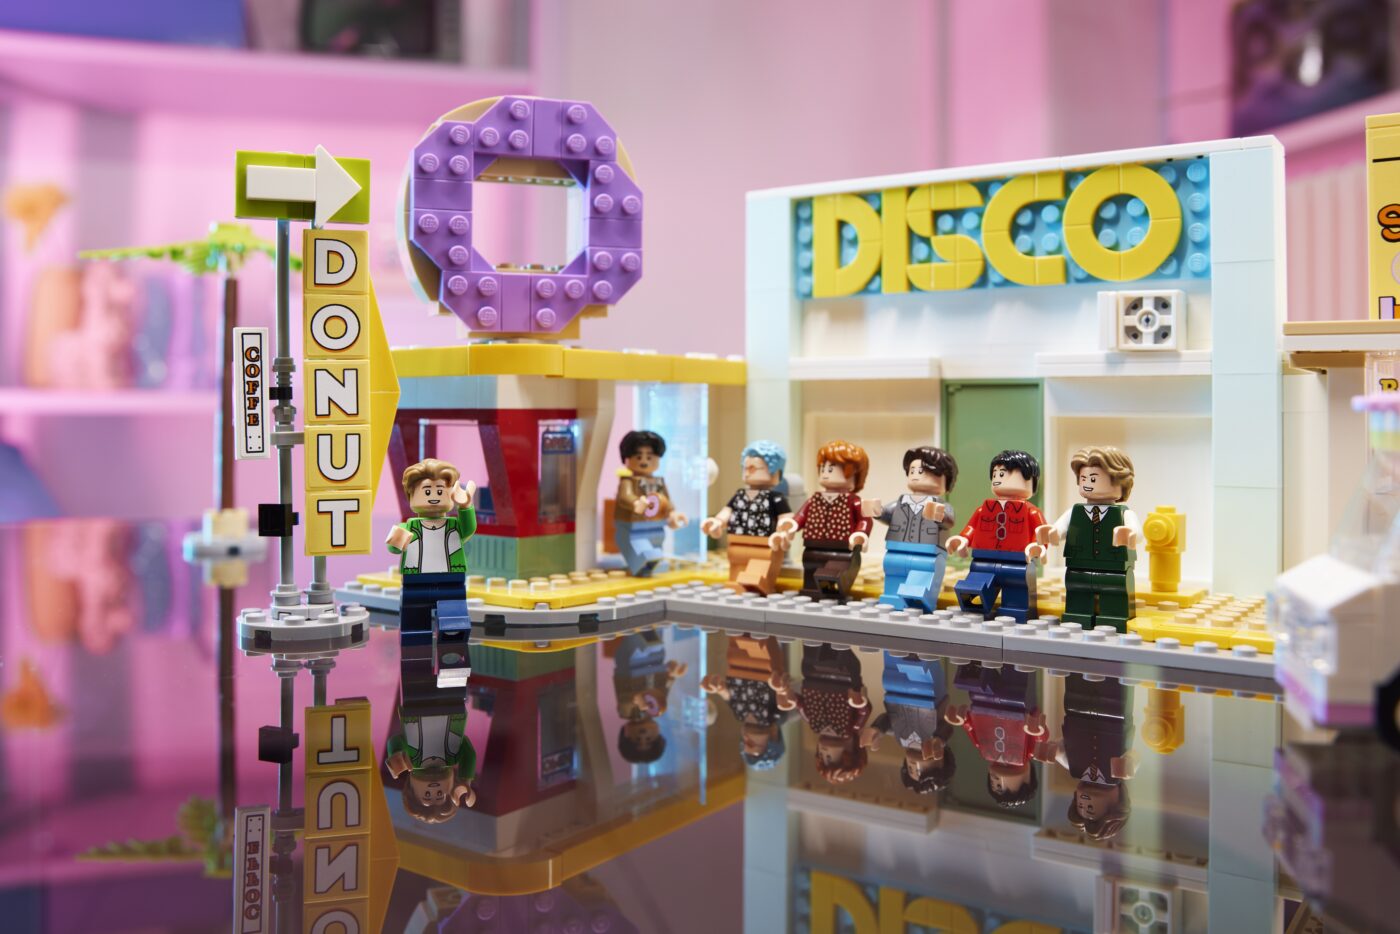 LEGO Ideas BTS Dynamite 21339 Model Kit for Adults, Gift Idea for BTS Fun  with 7 Minifigures of the Famous K-pop Band, Features RM, Jin, SUGA,  j-hope